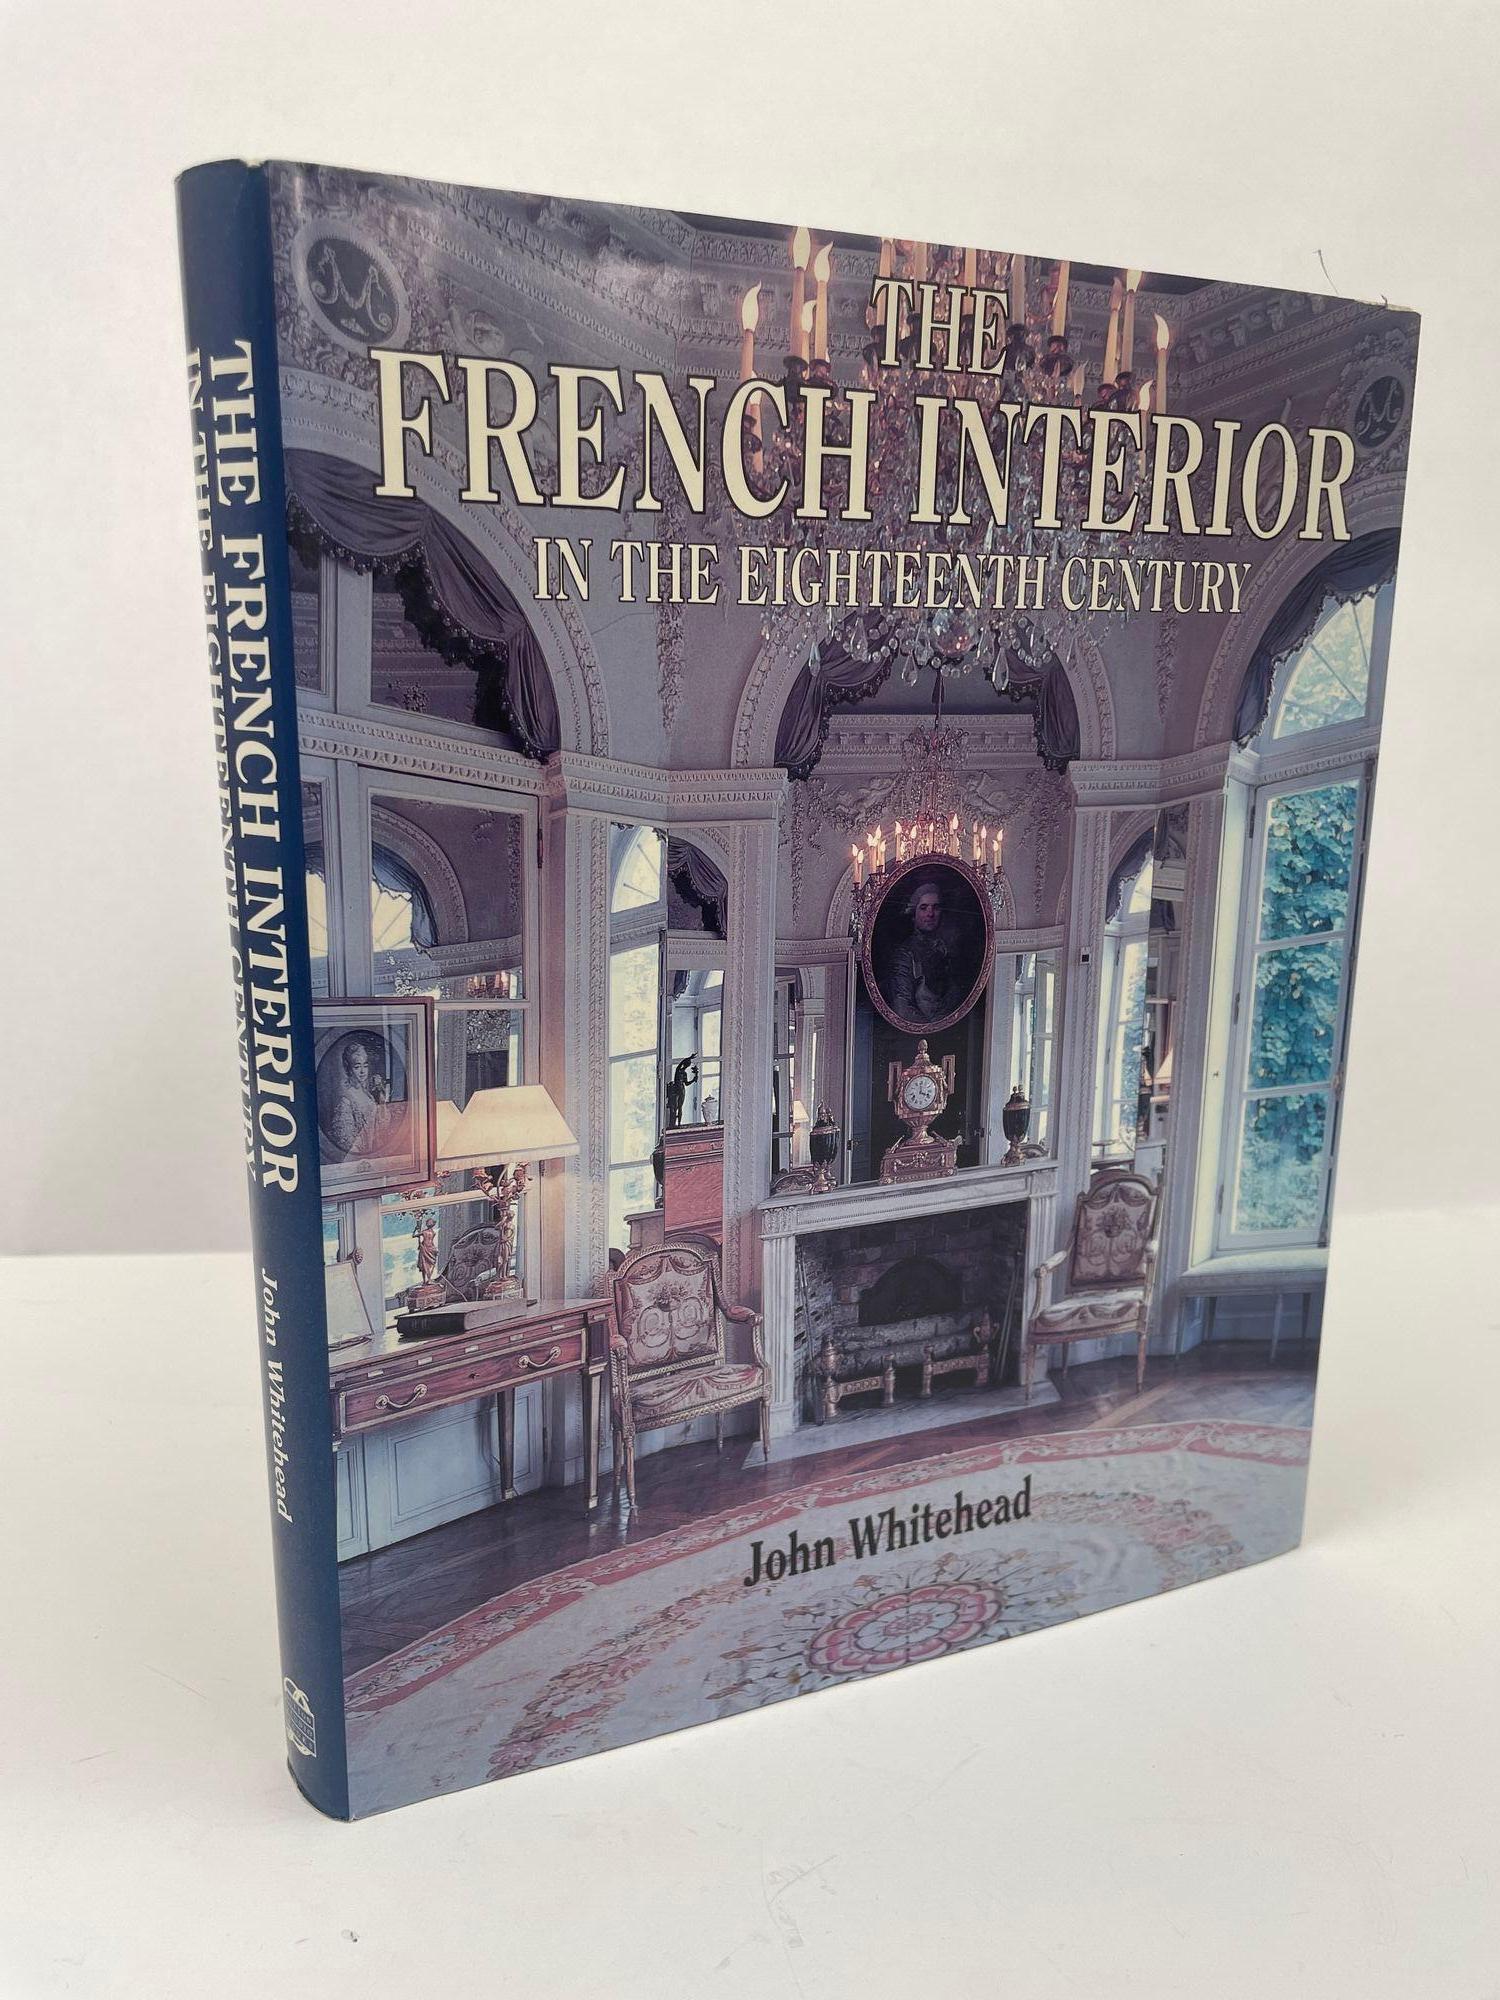 French Interiors of the Eighteenth Century Hardcover by John Whitehead For Sale 7